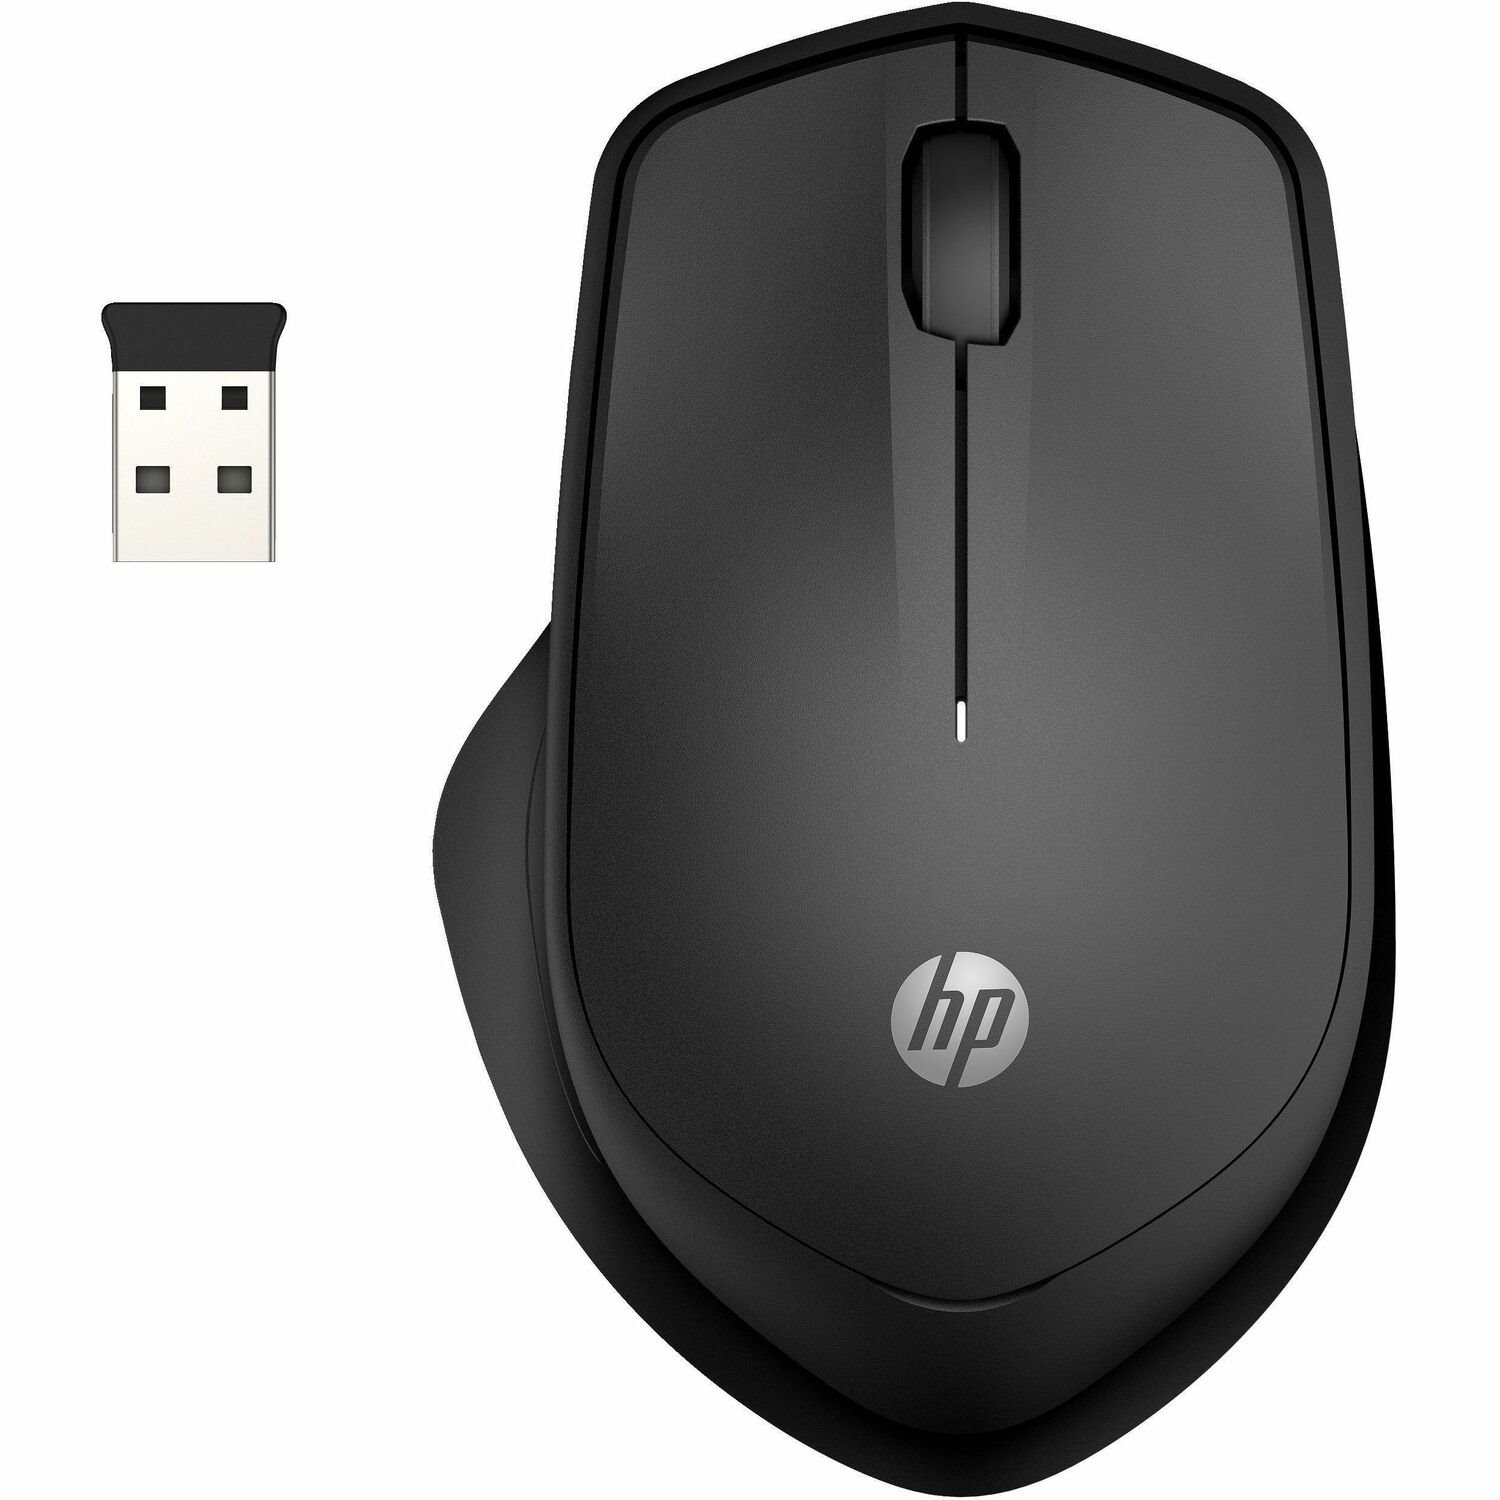 HP 285 Mouse - Radio Frequency - USB Type A - Optical - 3 Button(s) - Black - 1 Pack